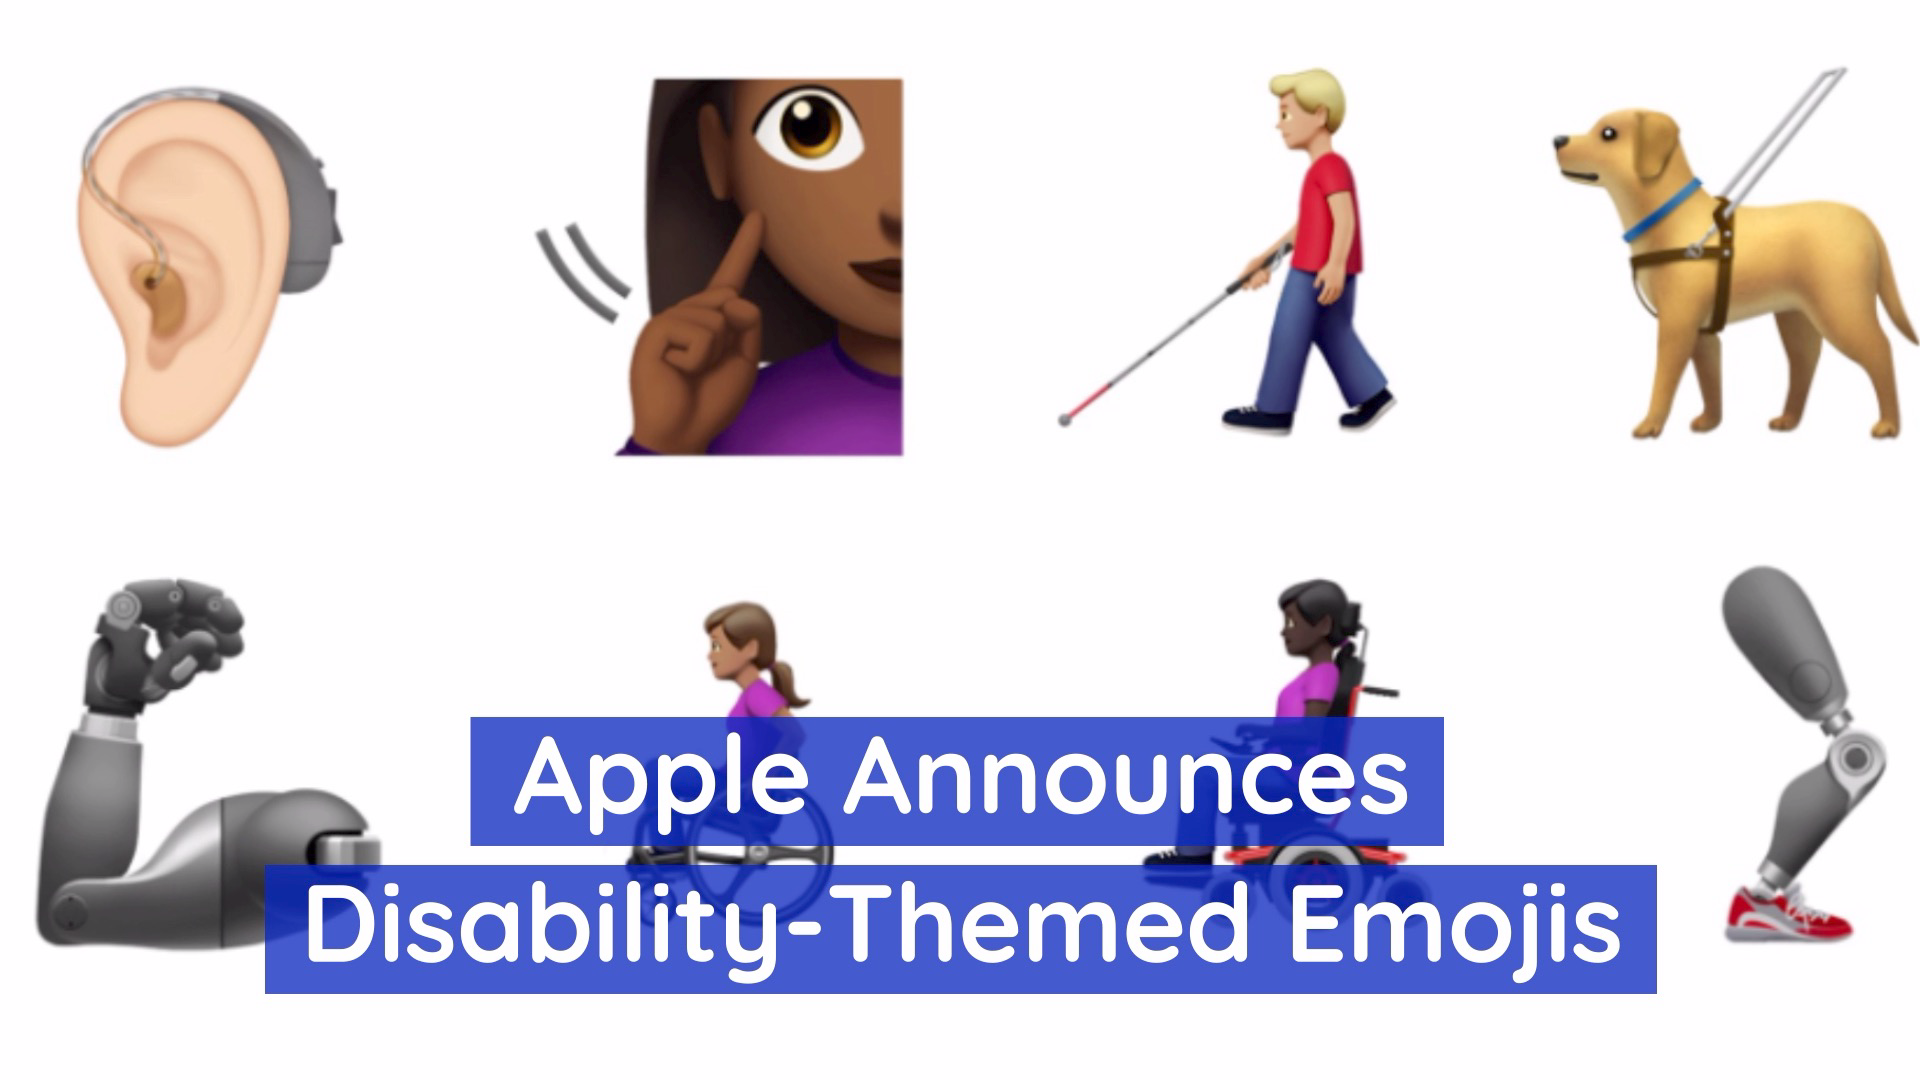 New Emojis Are Added To iPhones